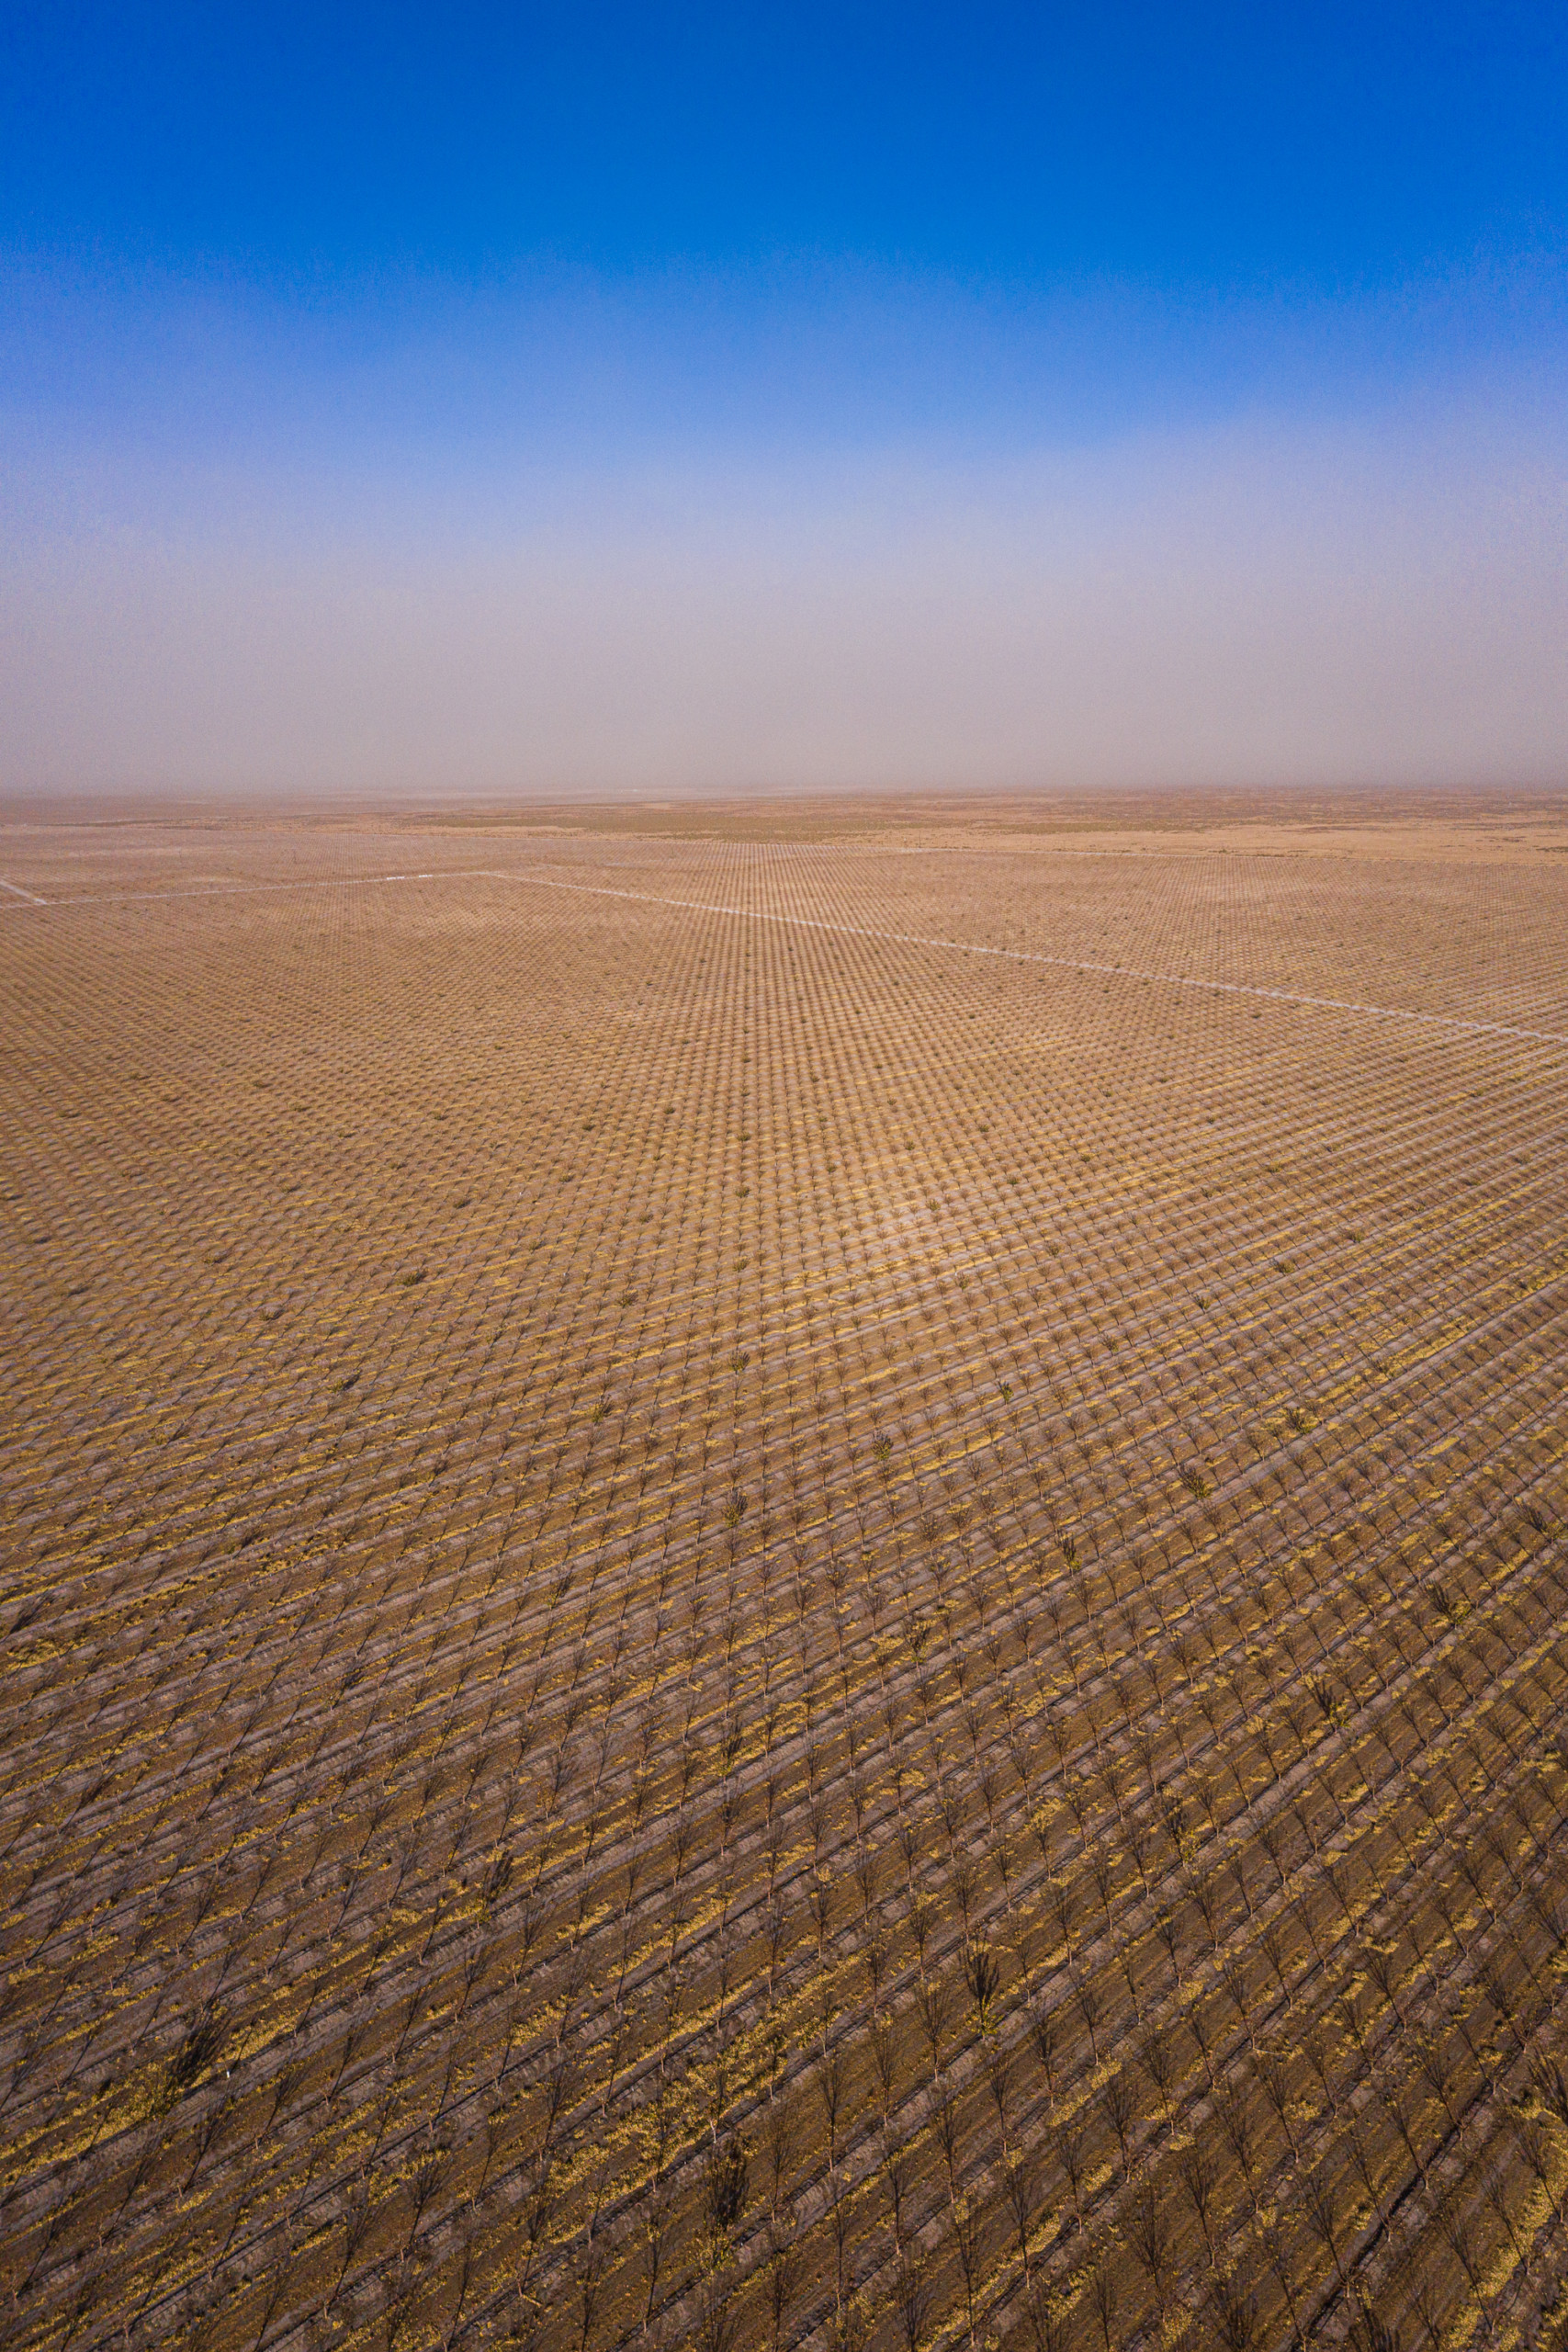 The haze of a dust storm over pistachio groves in Central California